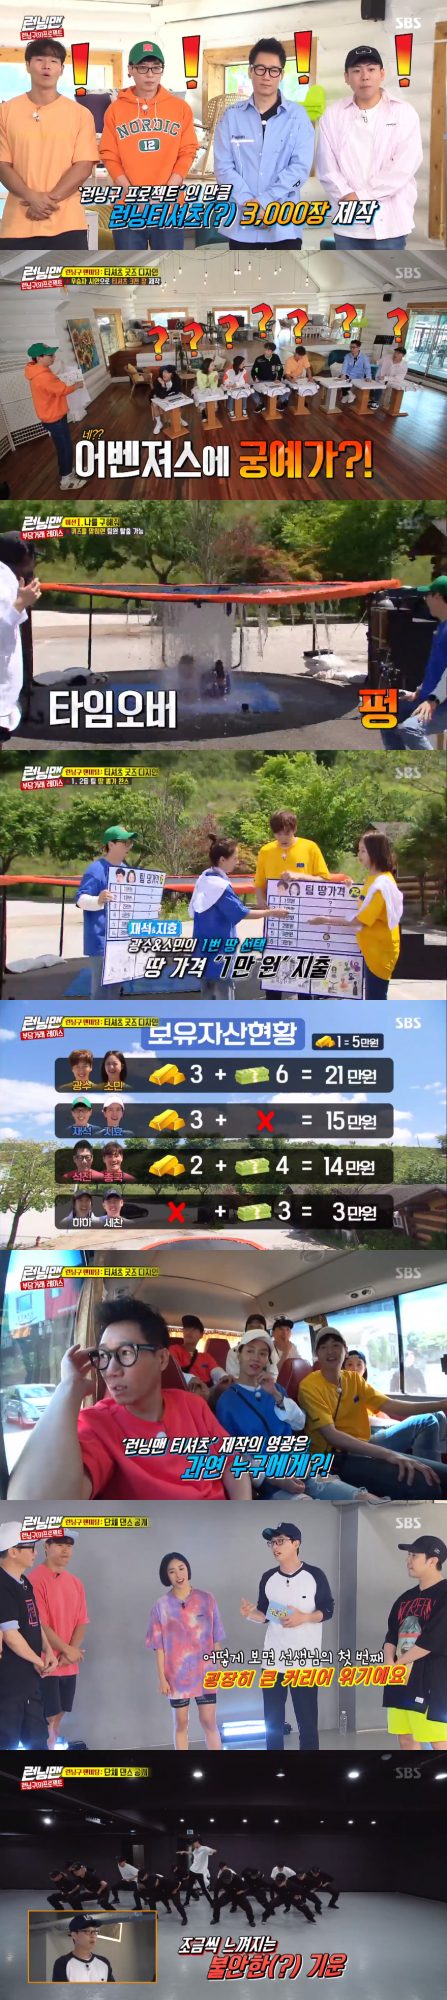 <p>SBS ‘Running Man’from the members of Love Without Love (Live at Summer Vacation/08 good T-shirt design to take the race unfolded.</p><p>2nd broadcast of ‘Running Man’at the 9th anniversary Love Without Love (Live at Summer Vacation/08 for ‘running the research project’the third story ‘The Running Man good size race’with brown. Before the race the girls were winning when looking to make T-shirts design directly painted. Yoo Jae Suk is a ‘keep off’, and support the analysis with ‘the tea’on, Kim Jong Kook ‘Jigsaw’is the concept that as each your own compelling it to laughter, I found myself in. Especially Kim Jong Kook on his paintings of members of the Yang Se-chan, and I was also.</p><p>Members throw the dice mission to acquire and the team shared. Yoo Jae Suk and Song JI Hyo, before So Min and Lee Kwang-Soo, HaHa and Yang Se-chan, JI-Seok and Kim Jong Kook, HaHa and Yang Se-chan, this is each teams gold acquisition and lunch ticket takes me to my’ mission was. One within a time limit the quiz to the right, and the other one is the tram out below are the quiz taker if the wrong water to fit the punishment to perform the game. Yoo Jae Suk and Song JI Hyo, haha and Yang Se-chan is in the Game 1, 2, etc accounted for. To and Yang Se-chan Is So Min and Lee Kwang-Soo to the gold bullion you stole that failed, but Yoo Jae Suk and Song JI Hyo, these gold bullion one to take came.</p><p>Broadcast at the end of a Love Without Love (Live at Summer Vacation/08 In showcase choreographer was unveiled. With cell club the taunt of ‘celebrity performances’, such as feeling that the members at the request of the choreography to prepare for came. Choreography created by Sterns ’24 hours’, and ‘TT’ such as choreography woven Liao Keeper was. Yoo Jae Suk is the choreographer RIA scheme introduction and “(‘Running Man’ Love Without Love (Live at Summer Vacation/08 of the choreography attempting to) and look at how teacher career of the first crisis,”he said to laughter, I found myself in. Members Love Without Love (Live at Summer Vacation/08-in to the choreography of the video to this analysis is the “This is the world level,”the few days was worried. Yoo Jae Suk also “it never seems to be”so “cool,”he marveled. Liao conversion “into cell Club features live on the level of the fit,”he explained.</p><p>Next weeks broadcast on Good Design to cross the race continues.</p>